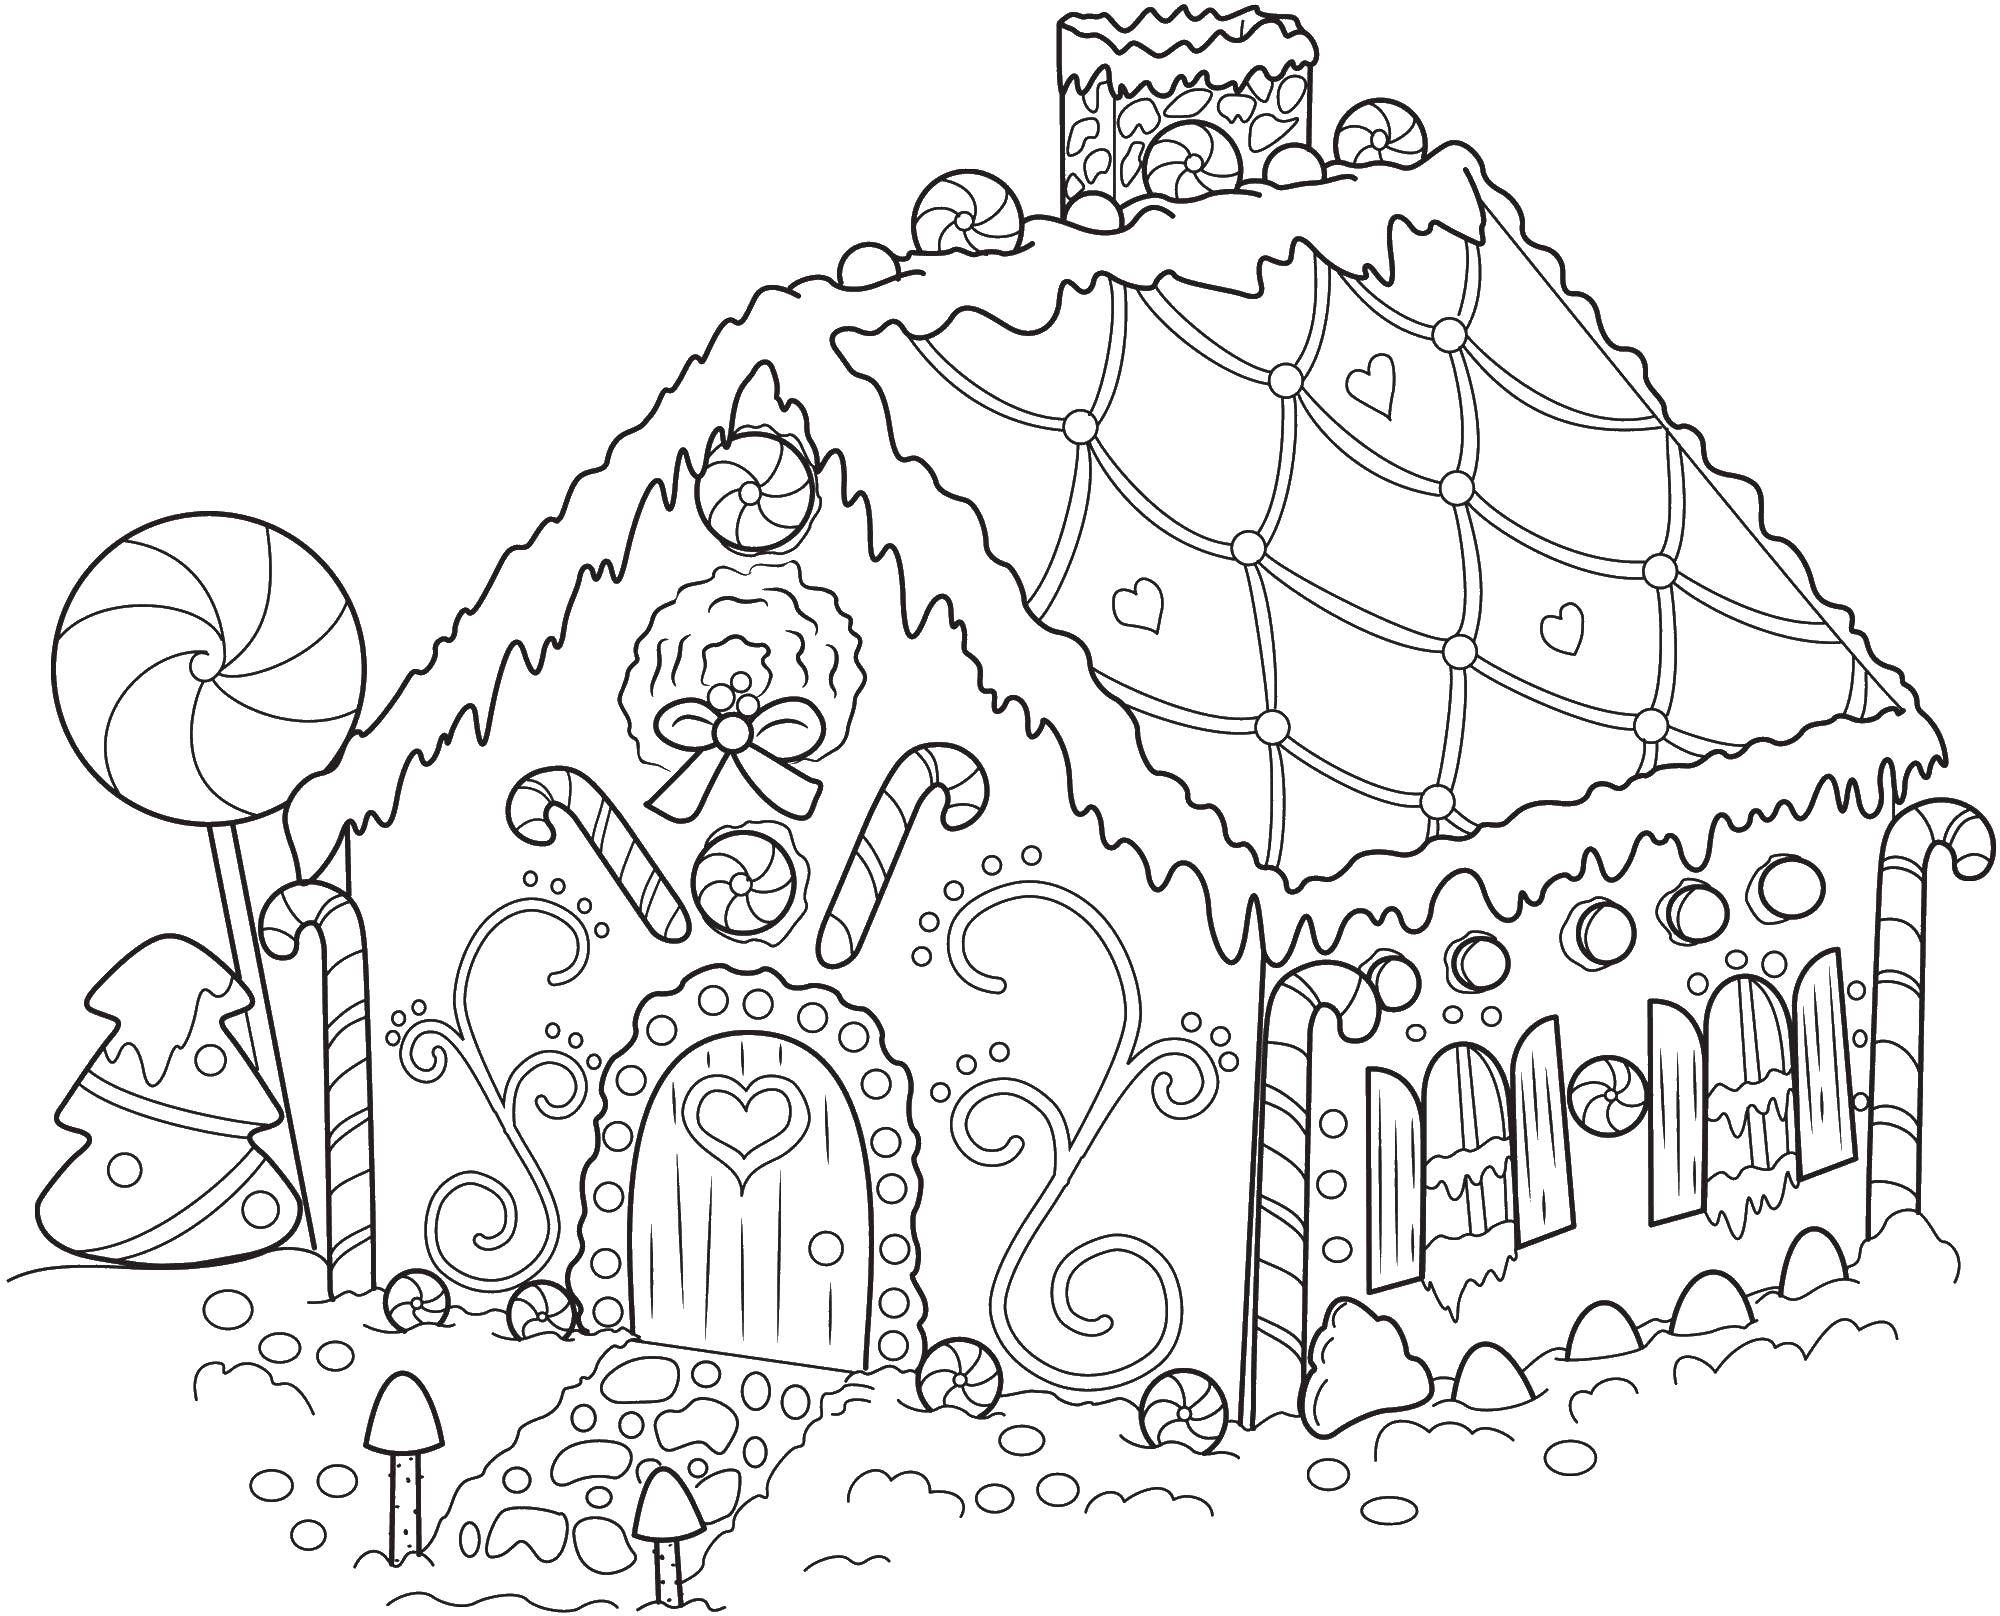 Coloring The house of Santa Claus. Category Coloring house. Tags:  house, Santa Claus.